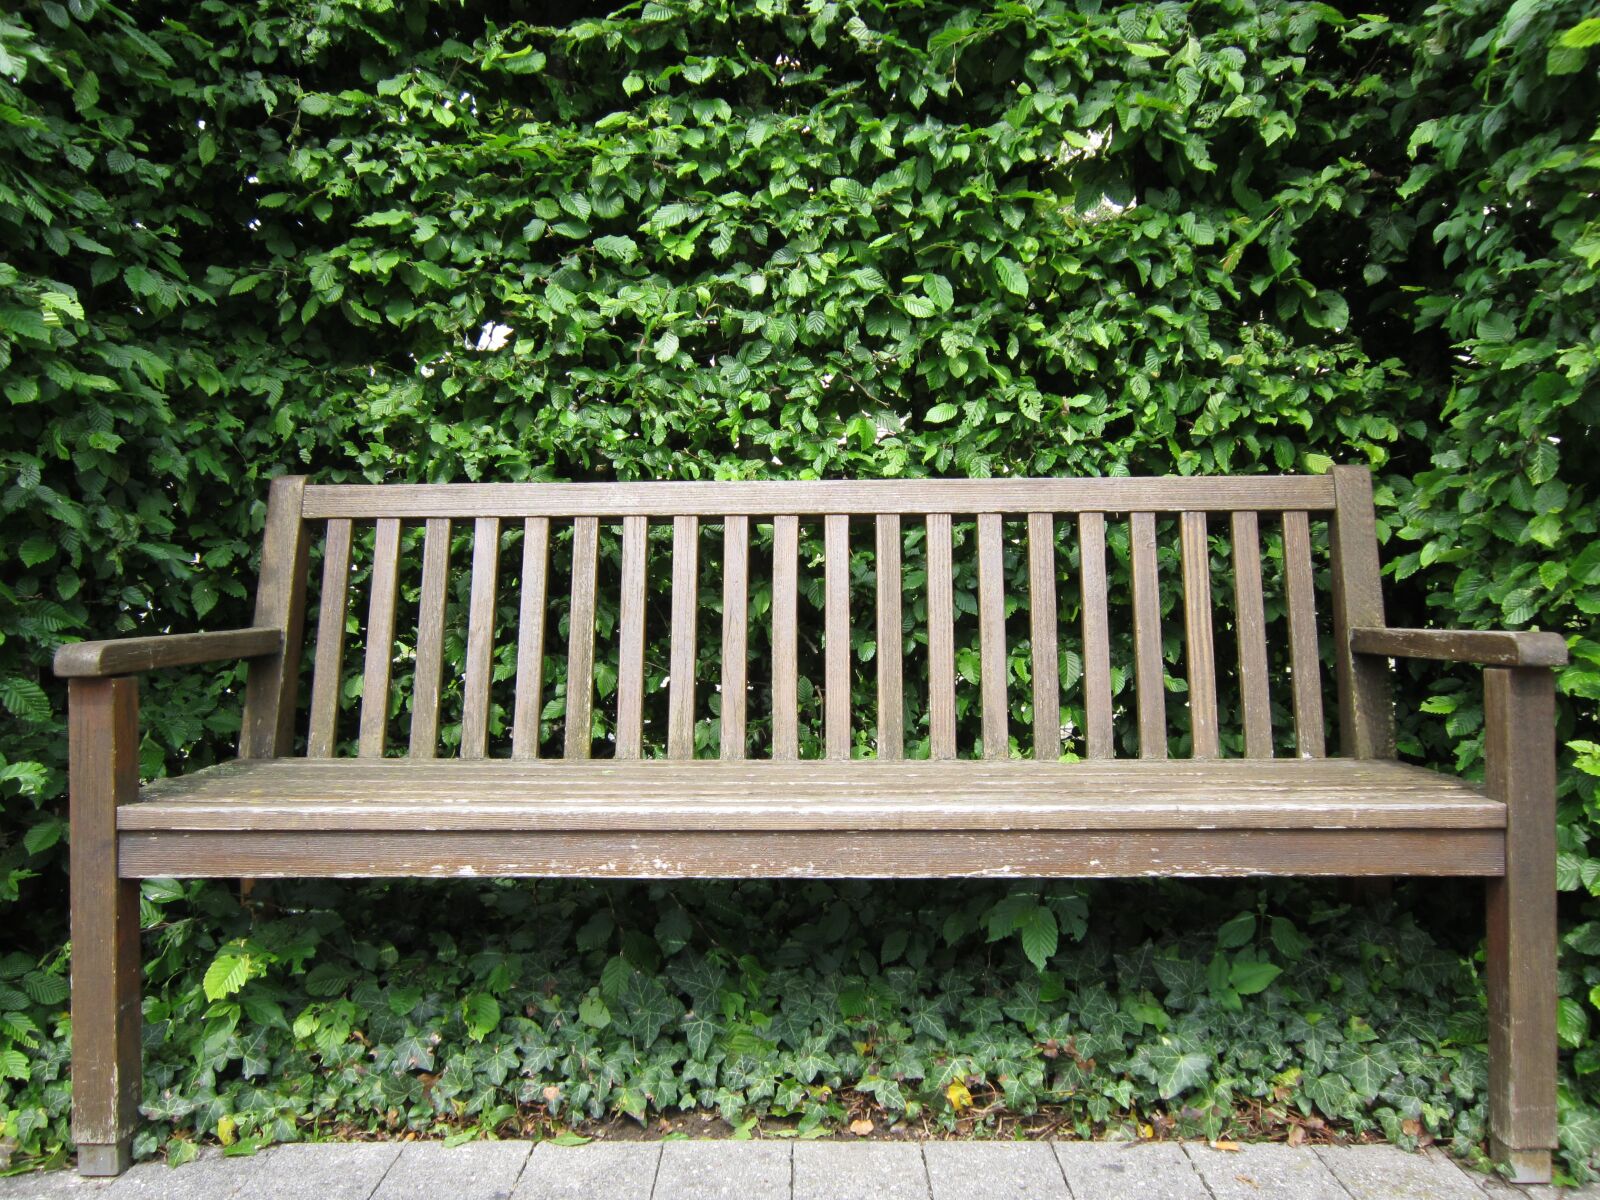 Canon PowerShot A3200 IS sample photo. Bank, wooden bench, nature photography